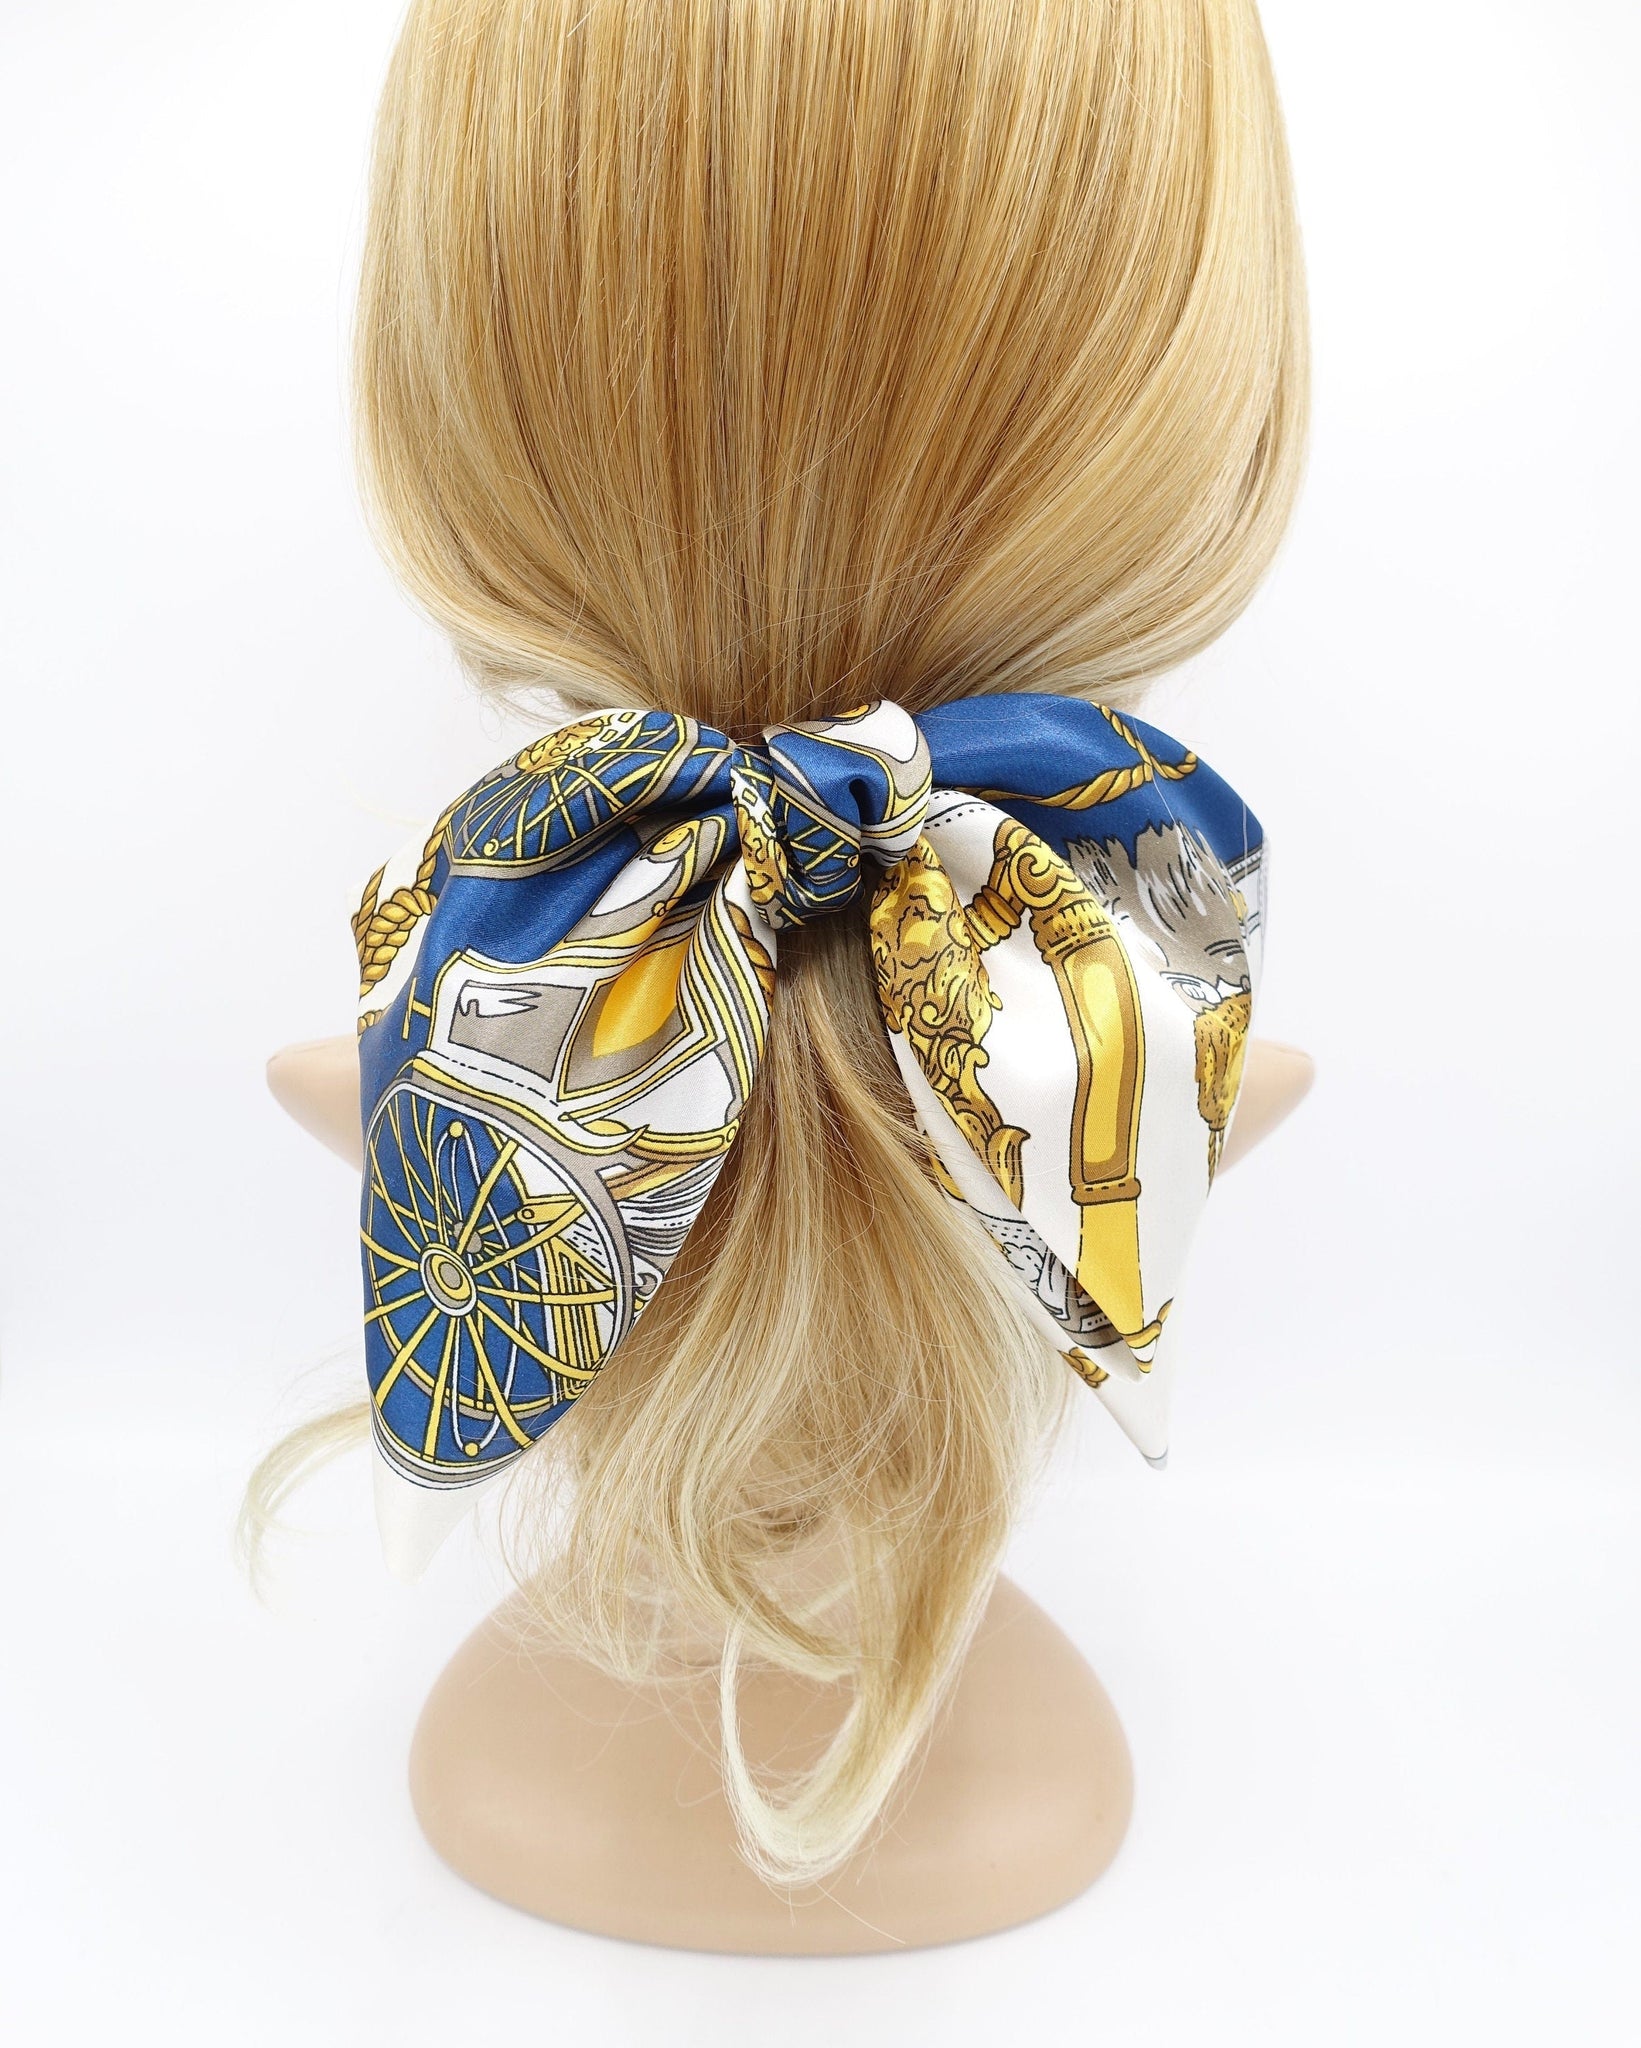 veryshine.com Barrette (Bow) Navy satin hair bow scarf carriage wheel rope print hair accessory for women